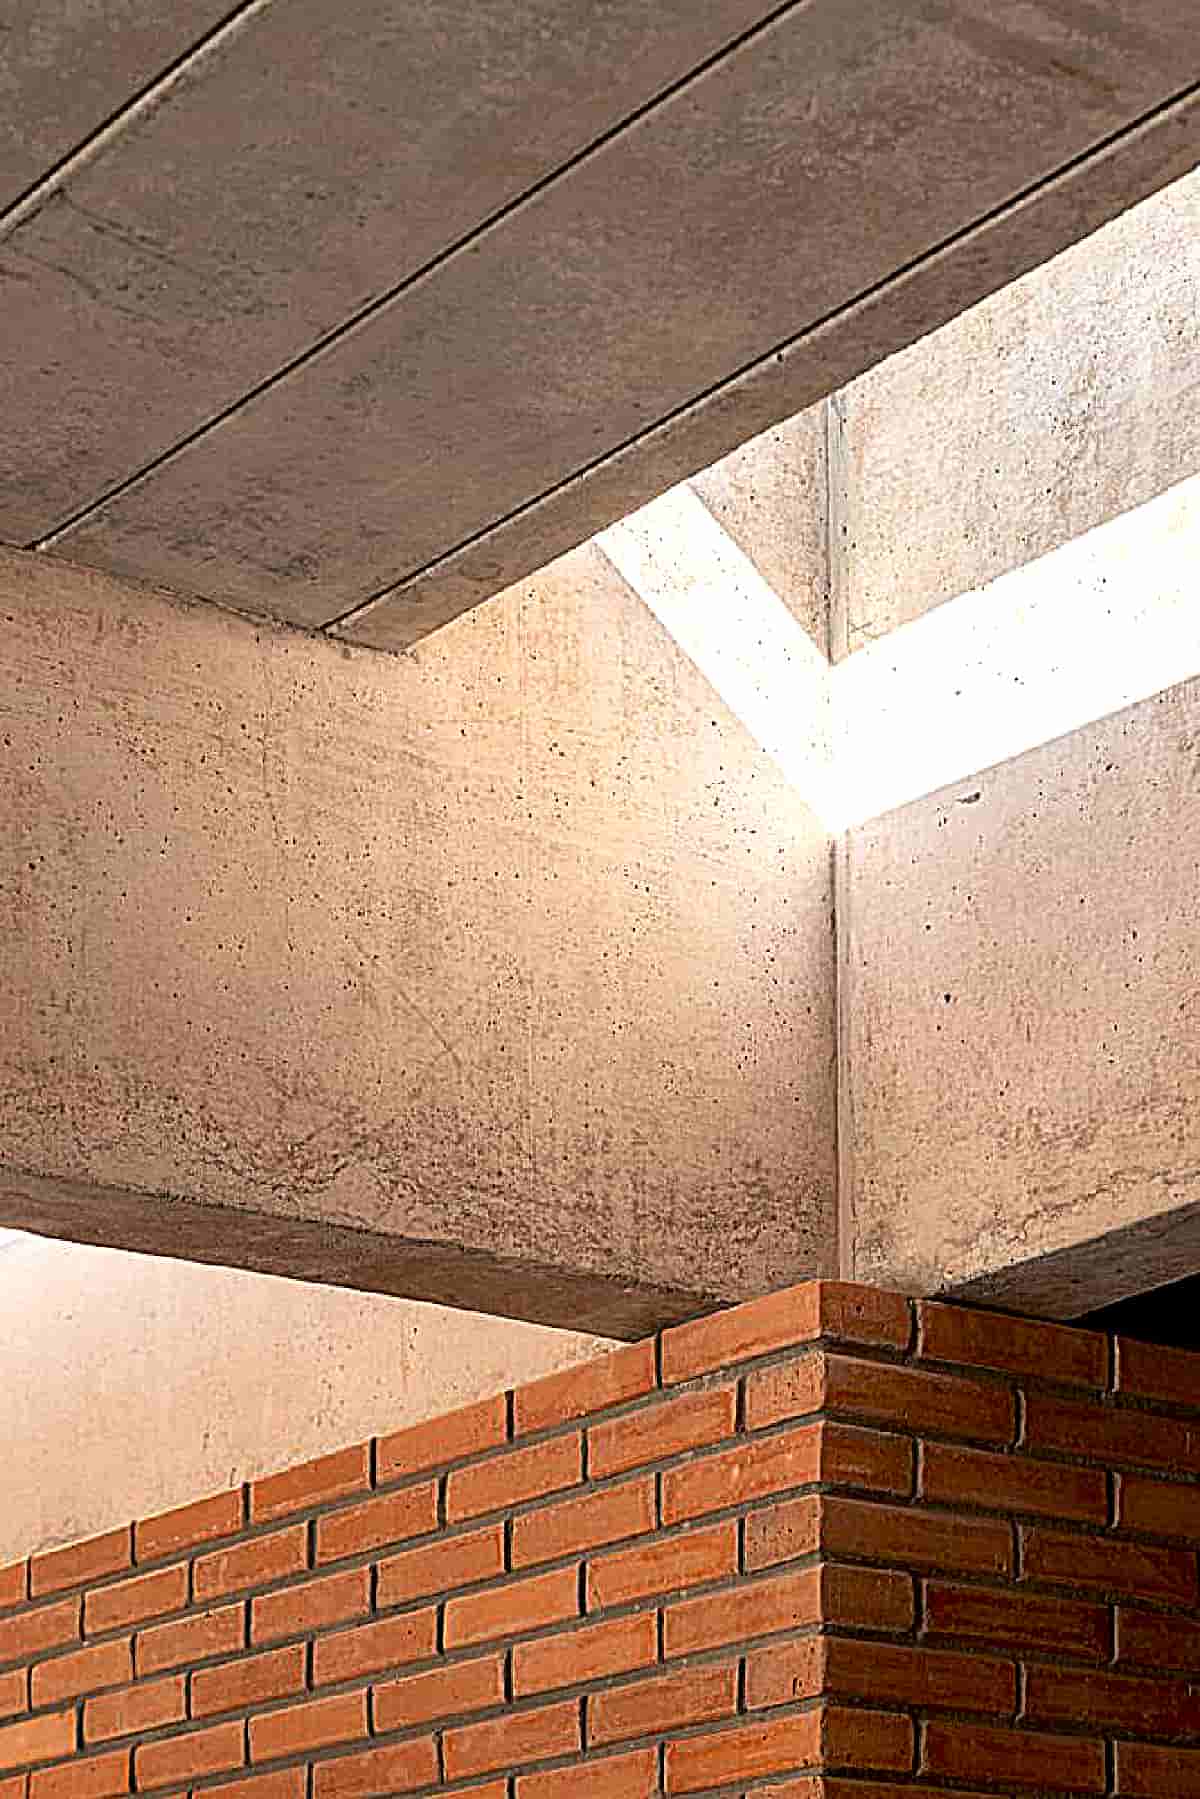 2-1txt) [The roof structure of the house is formed by 8 exposed concrete beams cast in place. With a length of 30.5 meters and spaced 2.10 meters apart. The beams are interspersed with exposed beams of the slab-panel type. A second mesh of perpendicular beams follows the internal divisions of the rooms and “ties together” the whole structure]. At some specific points (access gallery, bathrooms, circulations and internal sections of the room and balcony); The placement of the slab-panel joists is interrupted by linear skylights for natural lighting and/or ventilation. Most of the luminaires are built into these skylights.